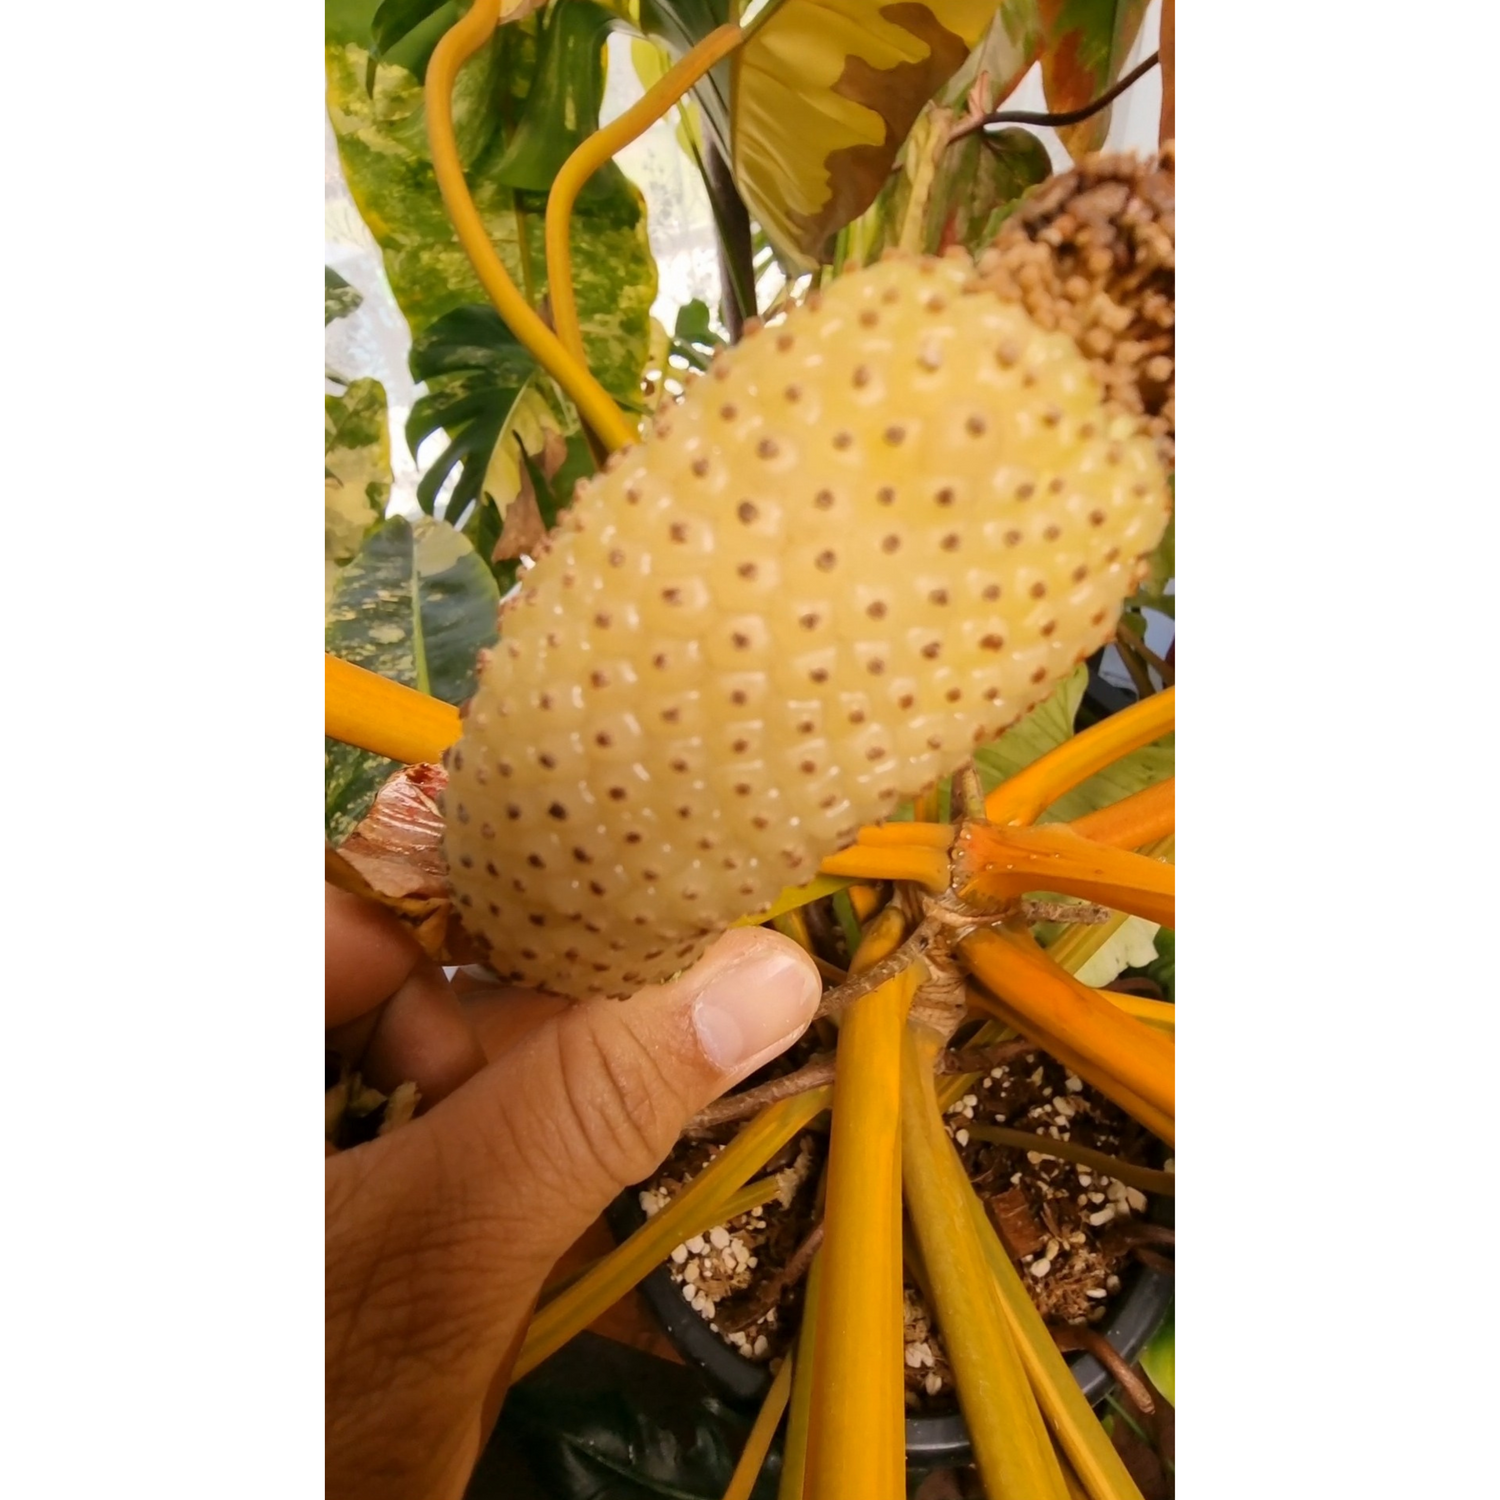 Variegated Philodendron billietiae seeds